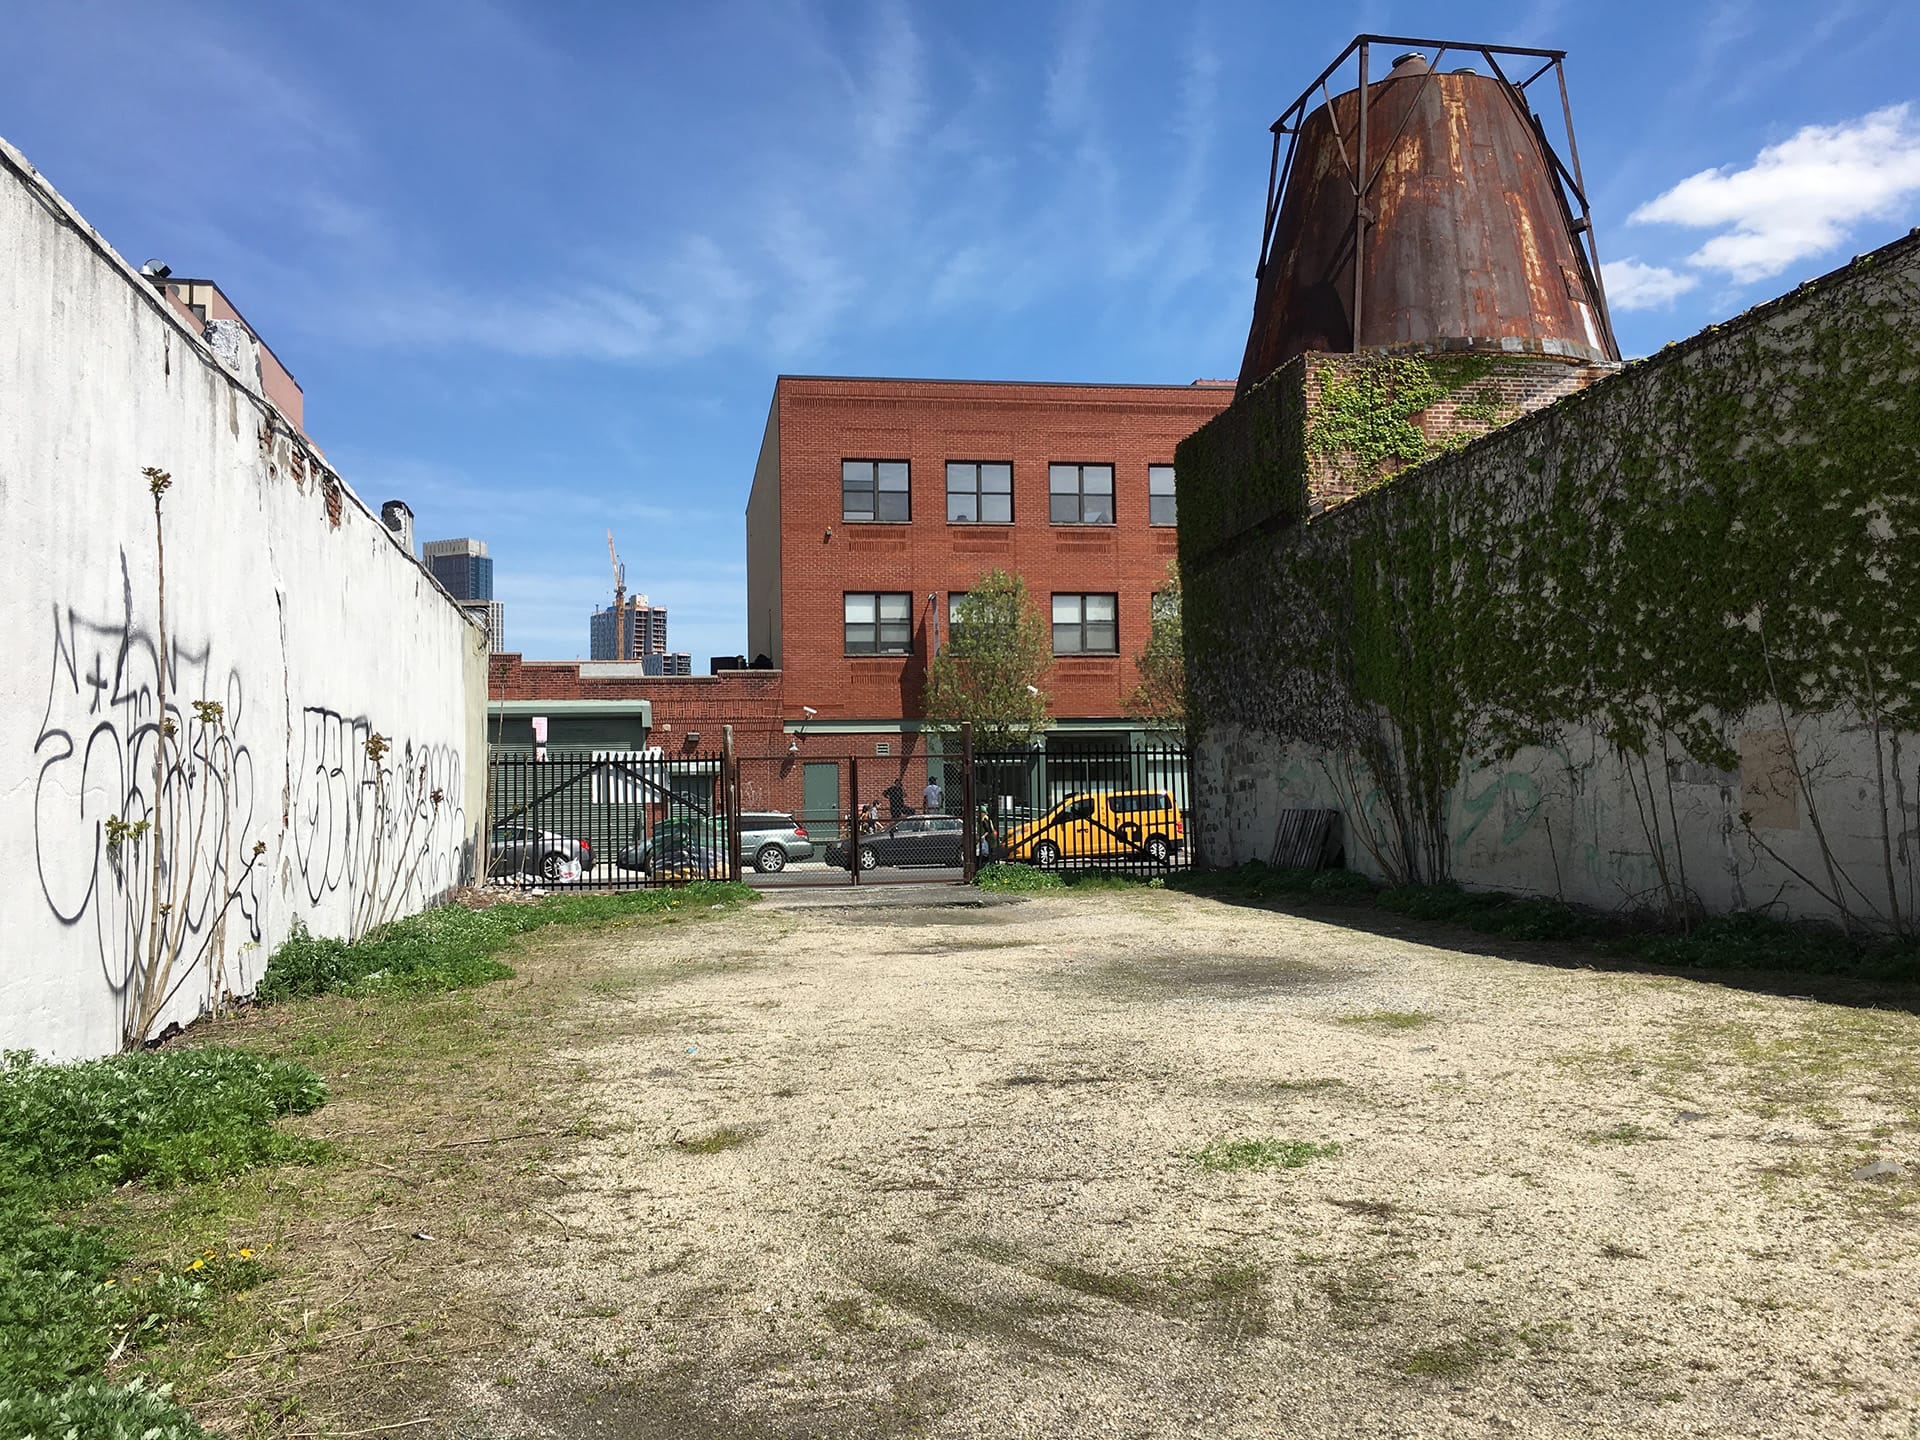 Empty gravel courtyard between two buildings in Gowanus, Brooklyn, with a gate separating the empty lot from the street.